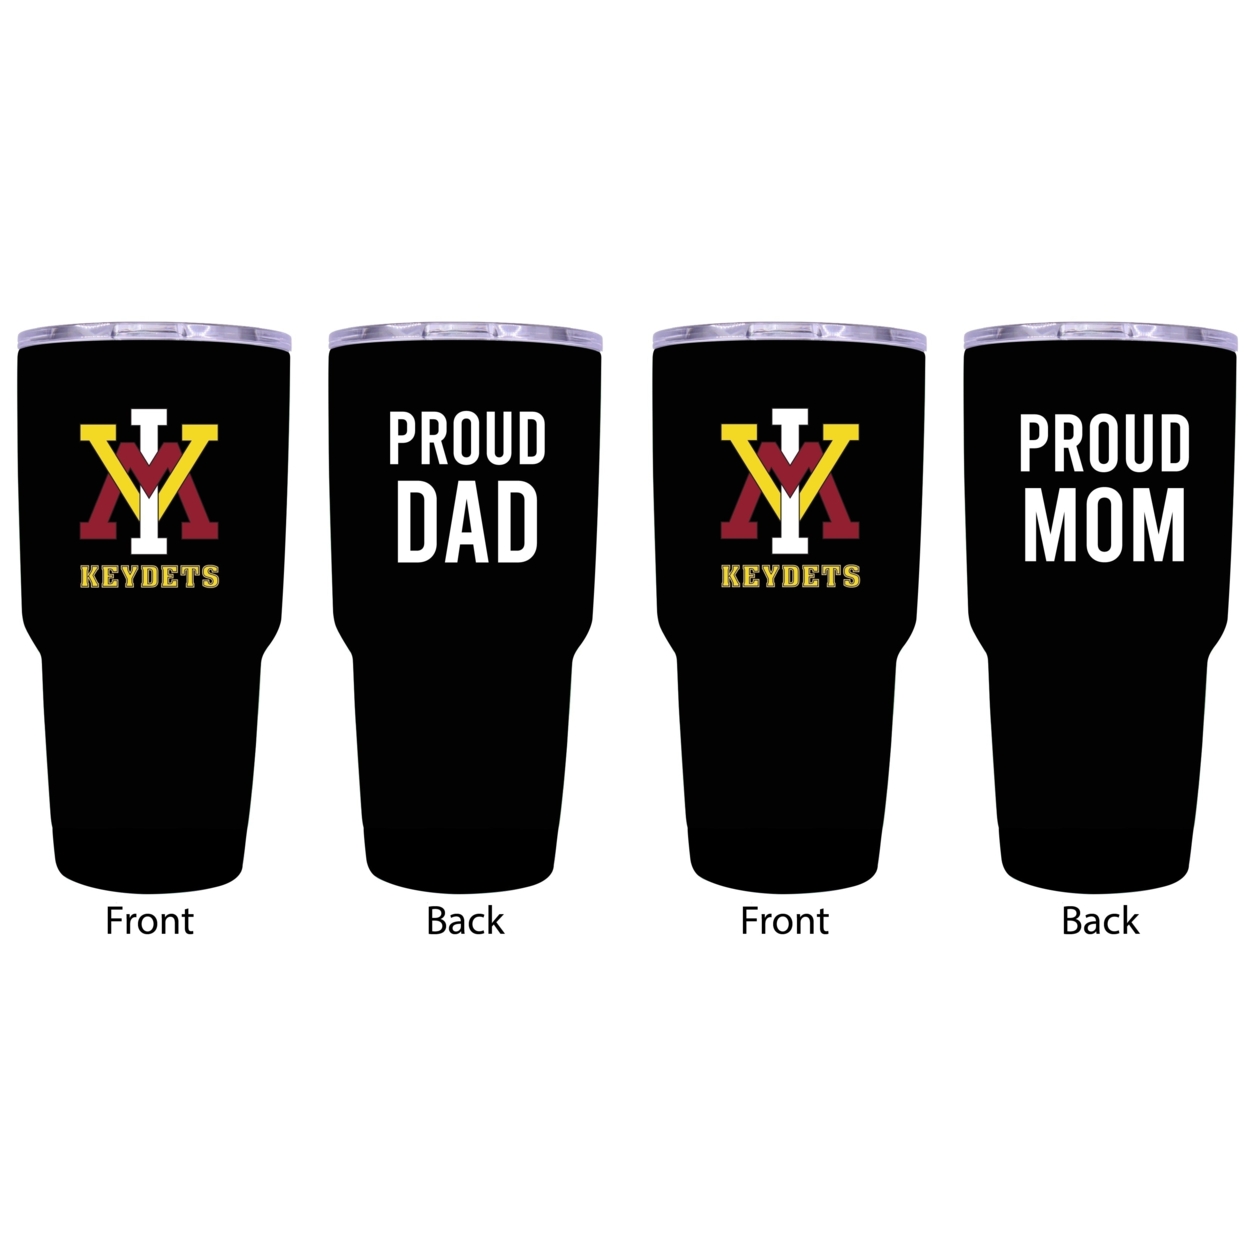 VMI Keydets Proud Mom And Dad 24 Oz Insulated Stainless Steel Tumblers 2 Pack Black.